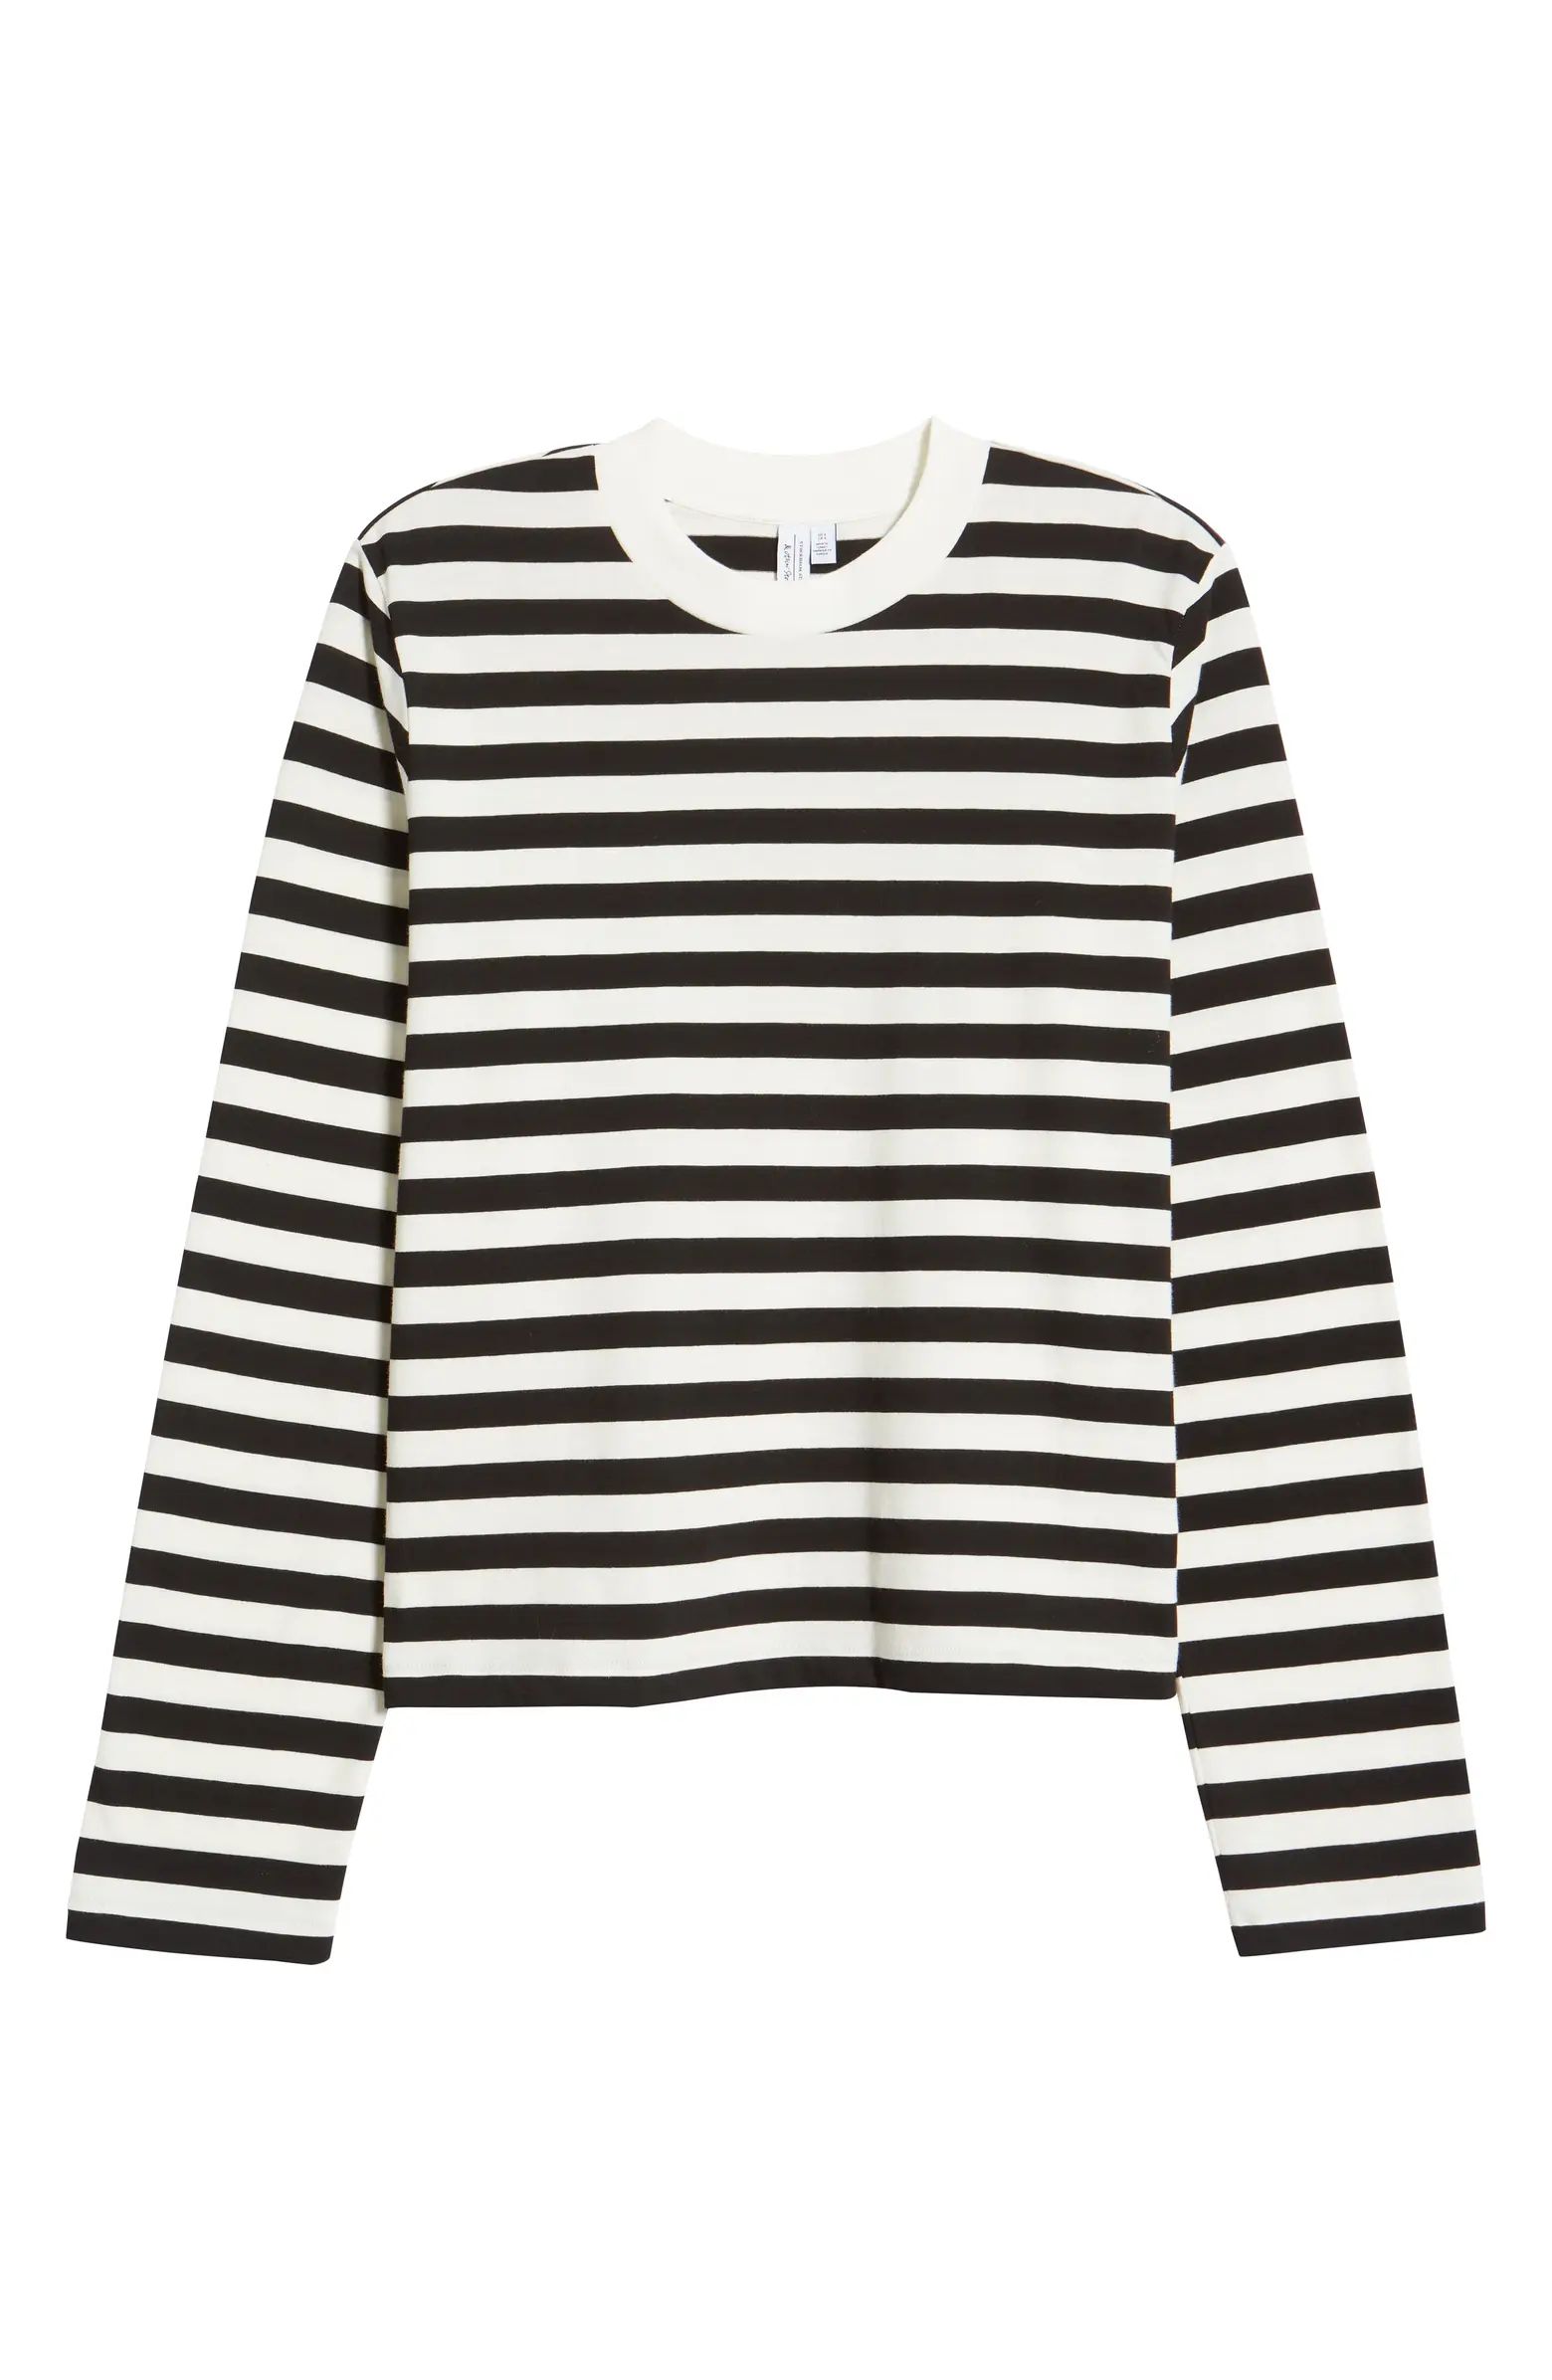 & Other Stories Stripe Long Sleeve Cotton Top | Nordstrom | Nordstrom